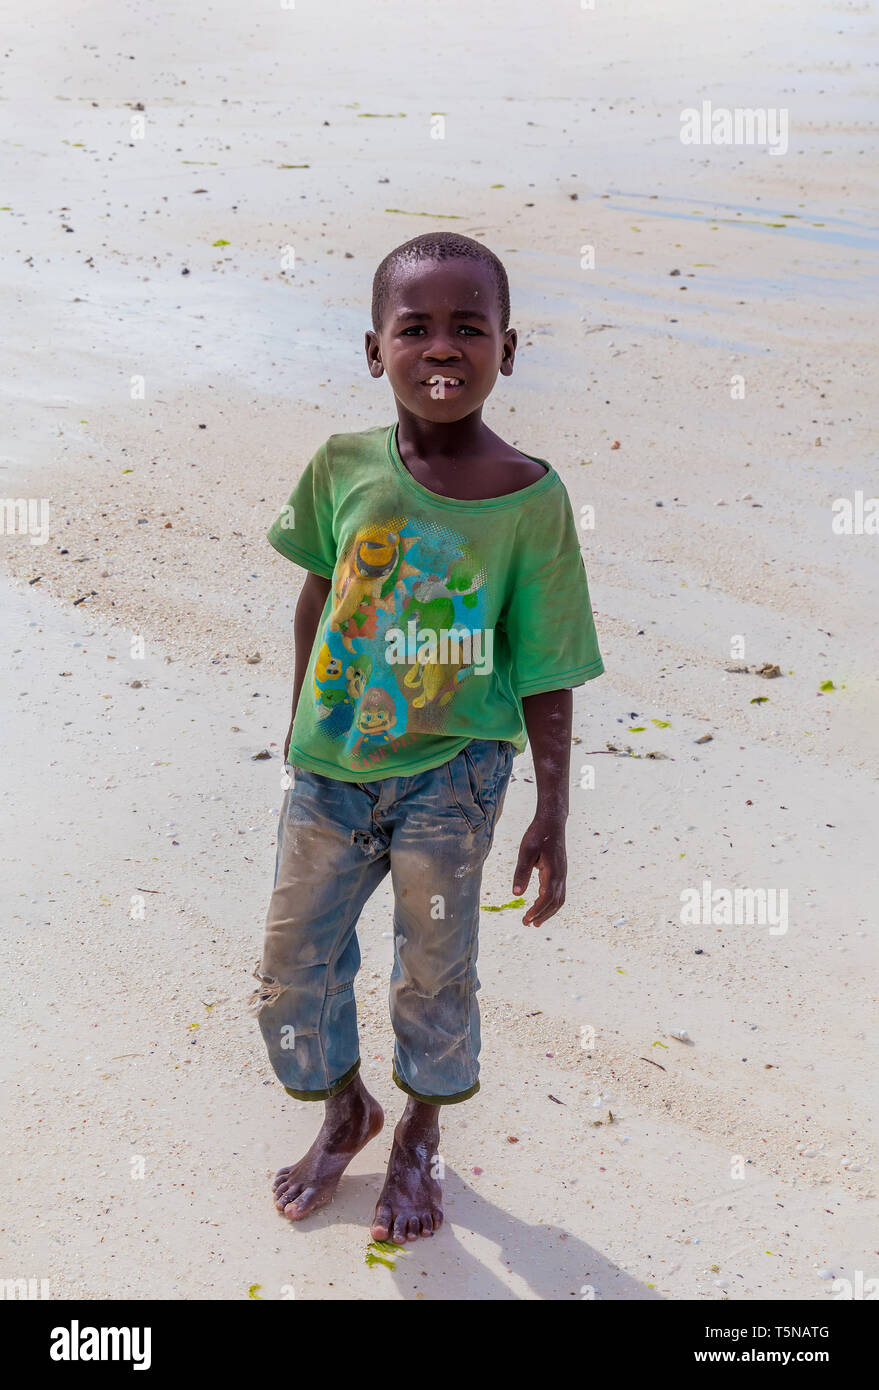 Tanzania, Zanzibar, march 21, 2018. One small african boy stands barefoot on sand in torn and dirty clothes. Stock Photo